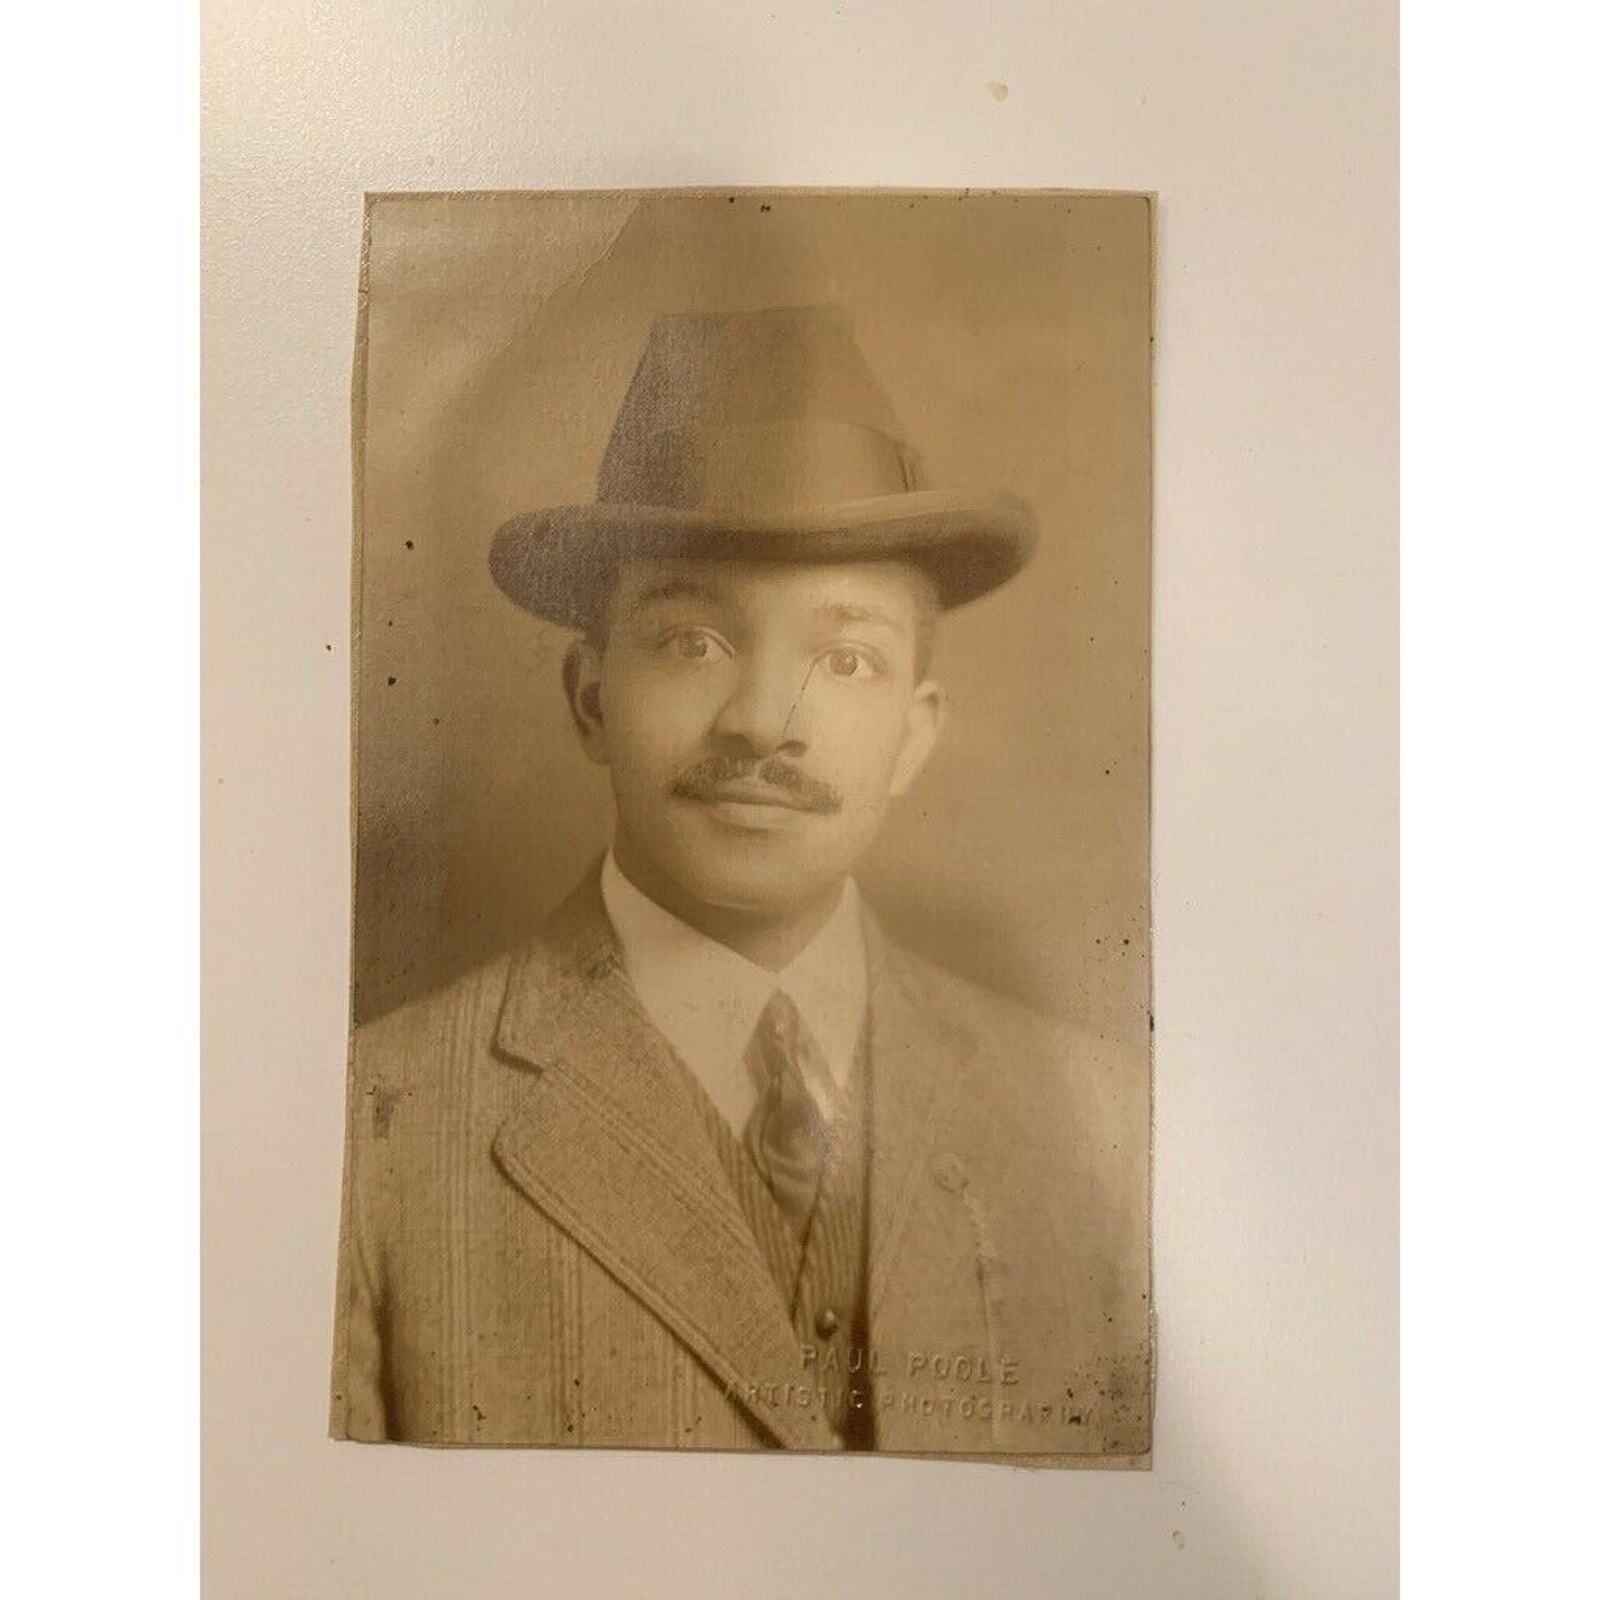 Paul Poole Artistic Photography - Vintage Photo Postcard, African American 